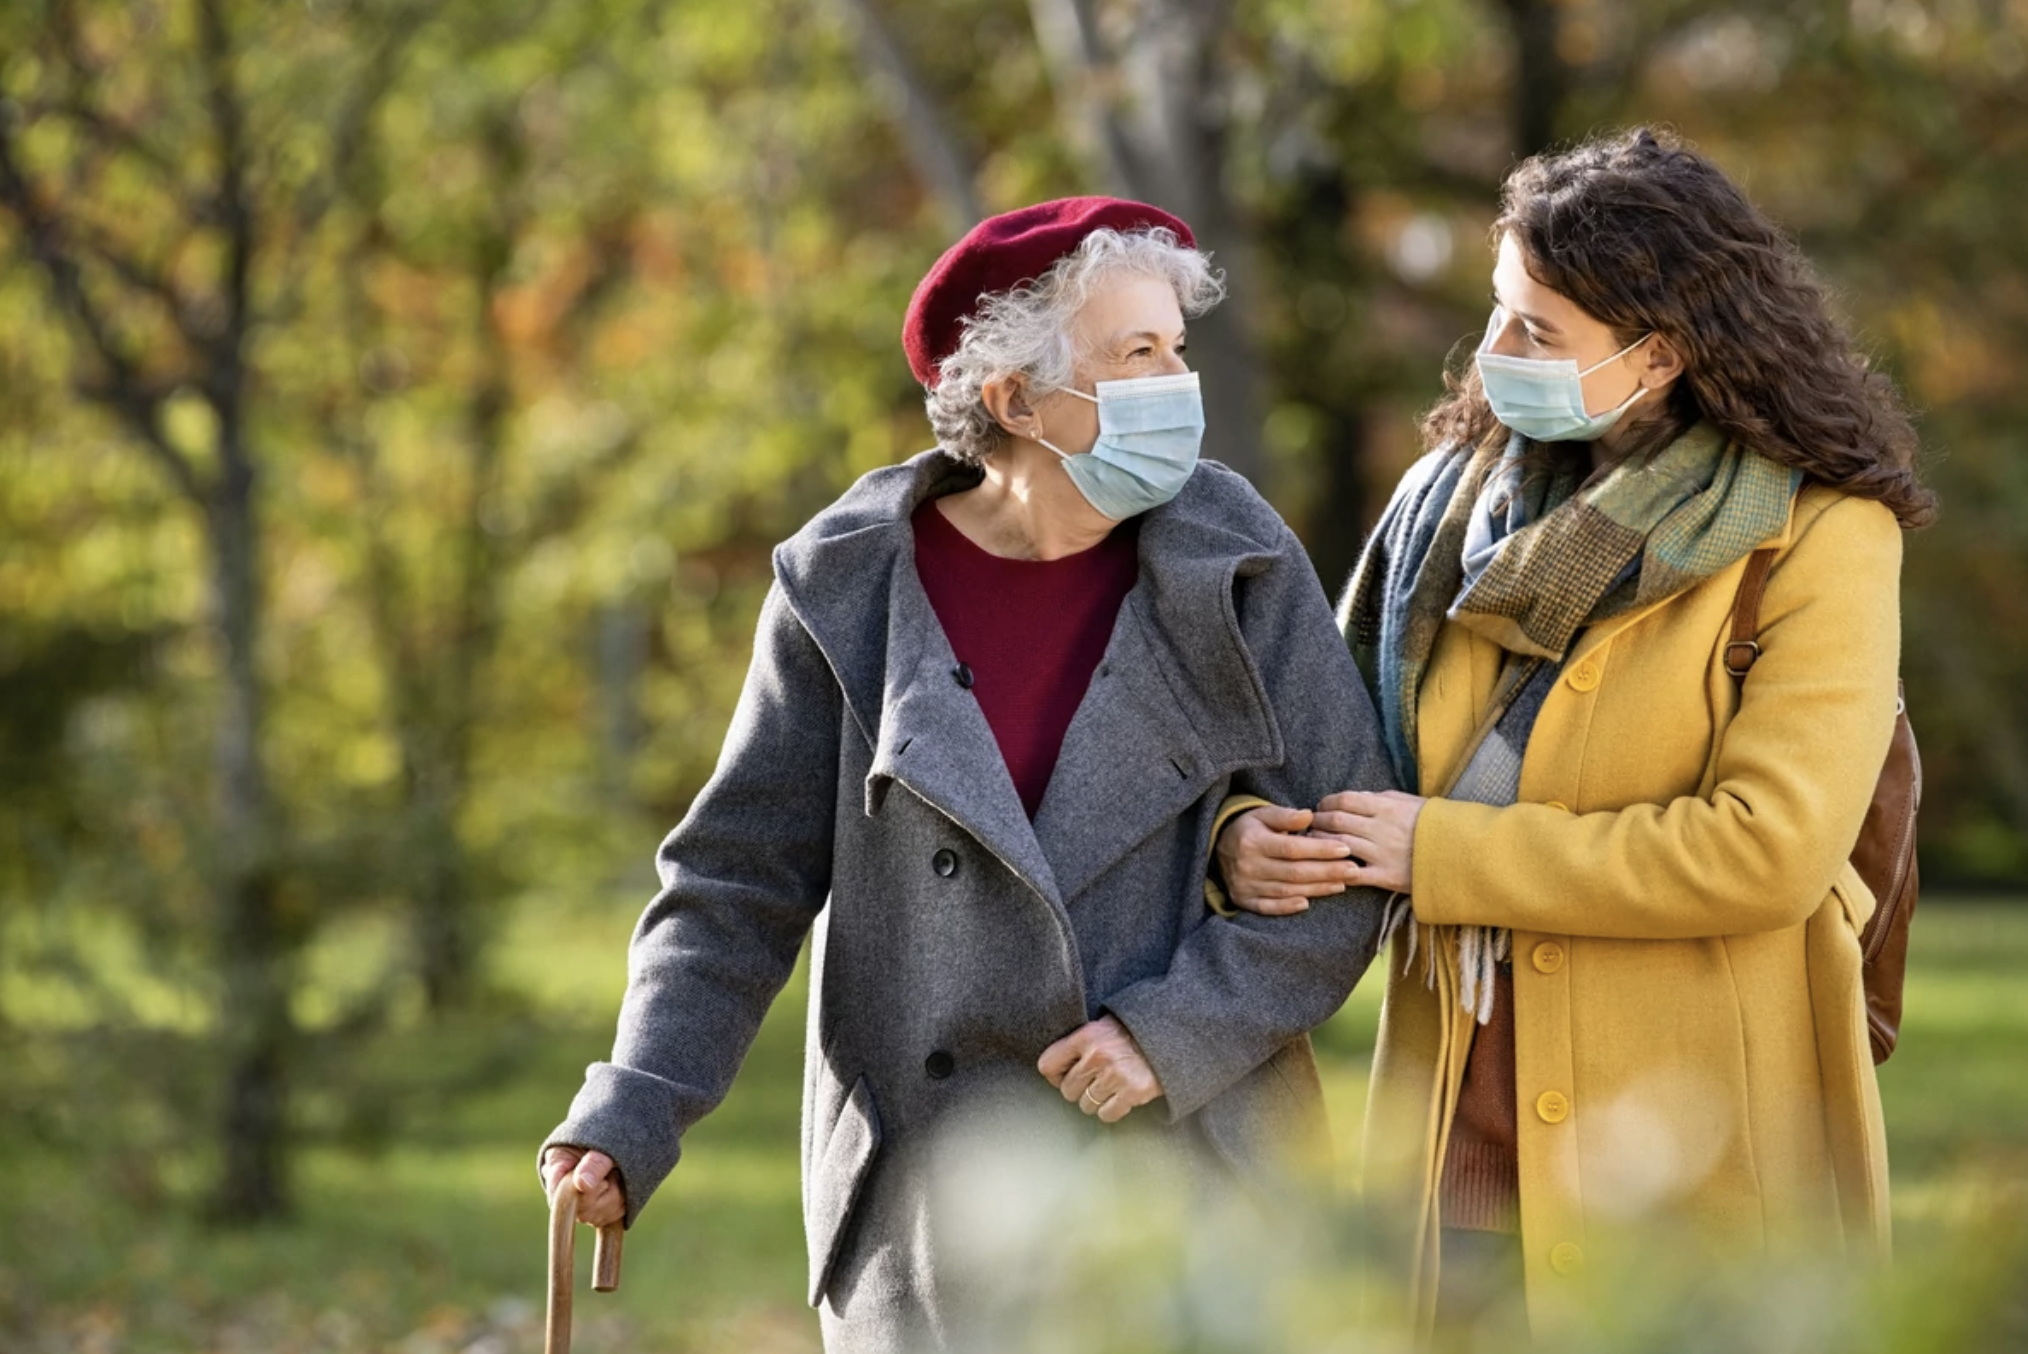 A senior woman and her caregiver taking a walk in the park during fall while wearing masks.